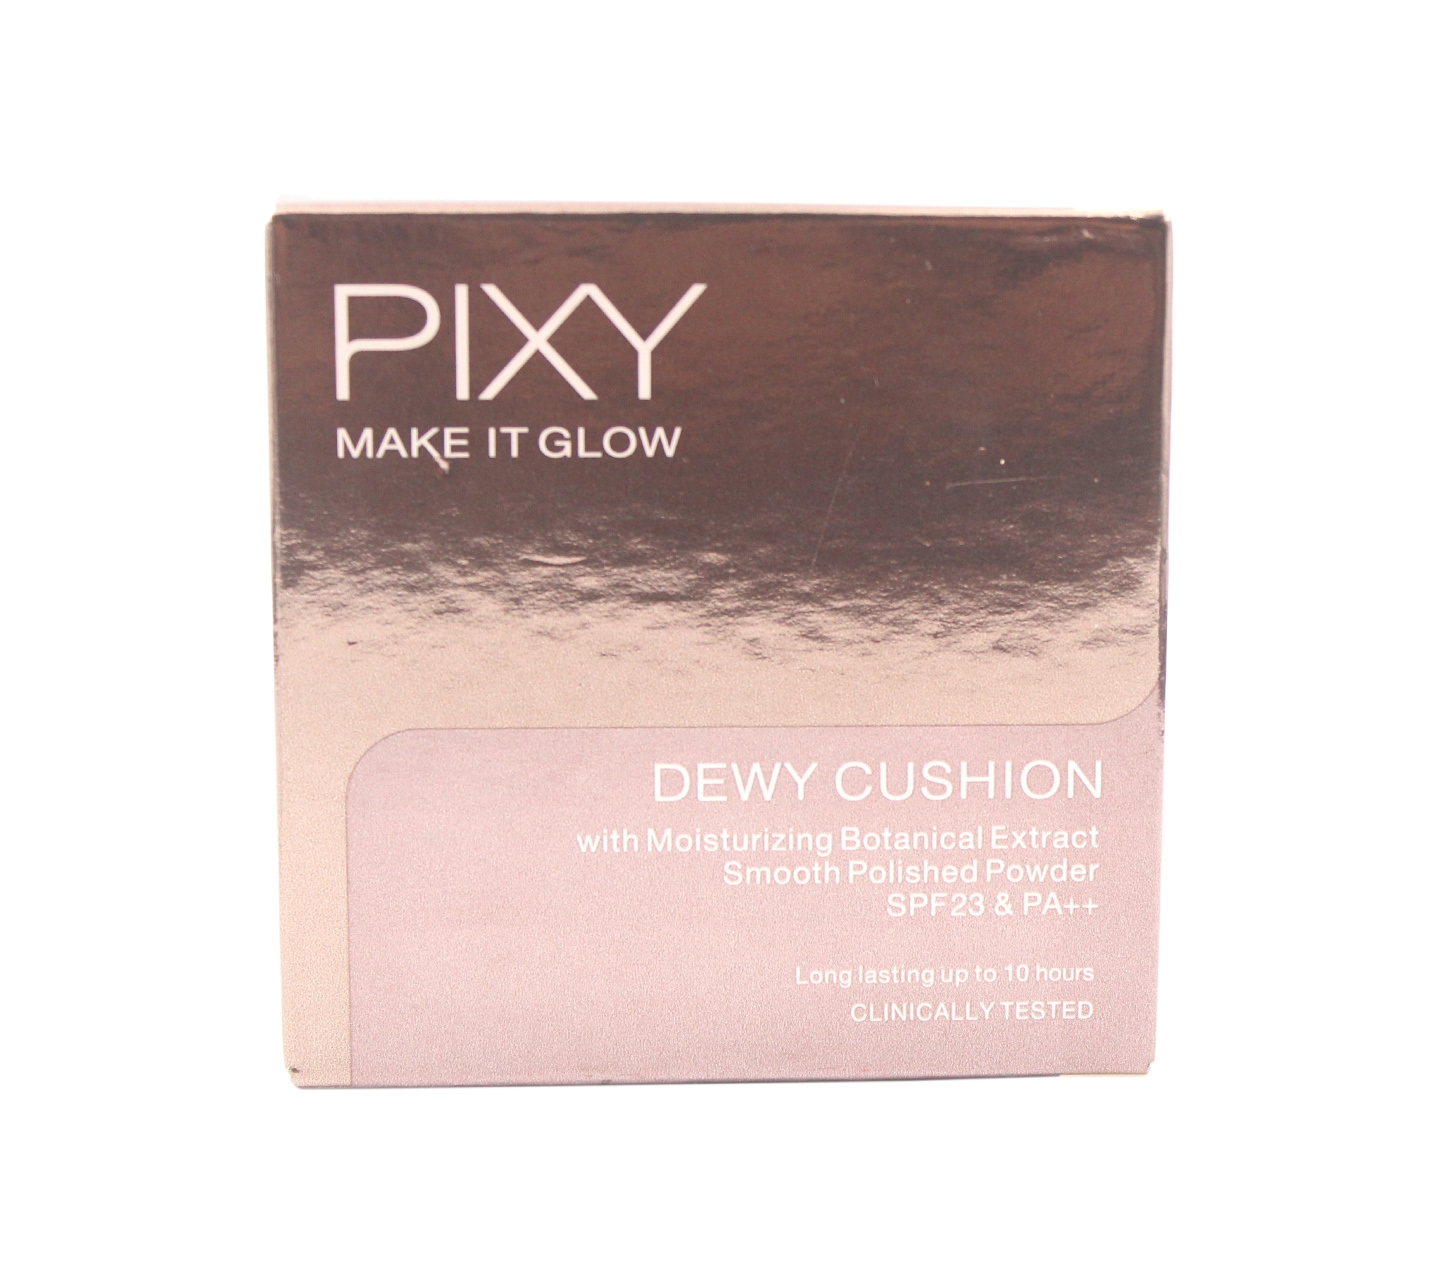 Pixy 201 Nautural Beige Dewy Cushion Make It Glow Faces